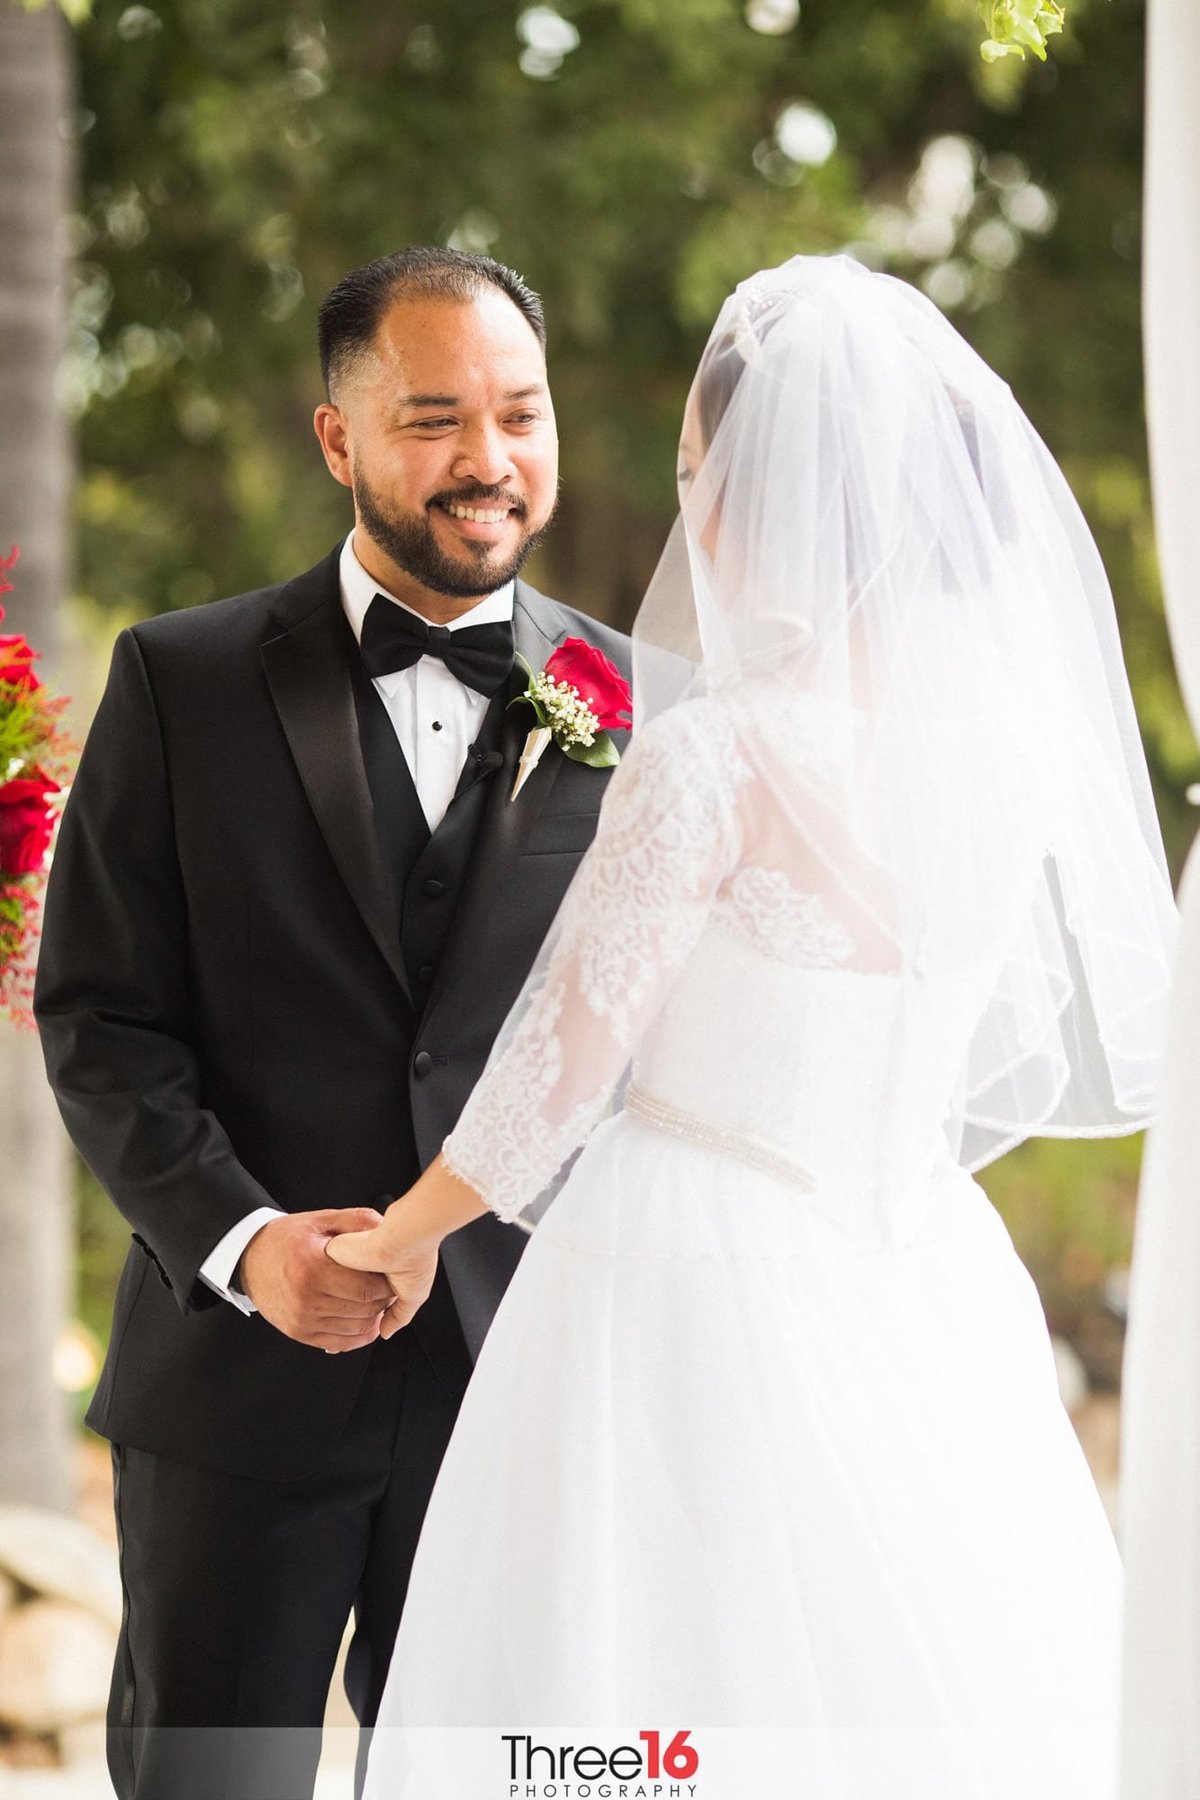 Groom smiles at his Bride while holding her hands